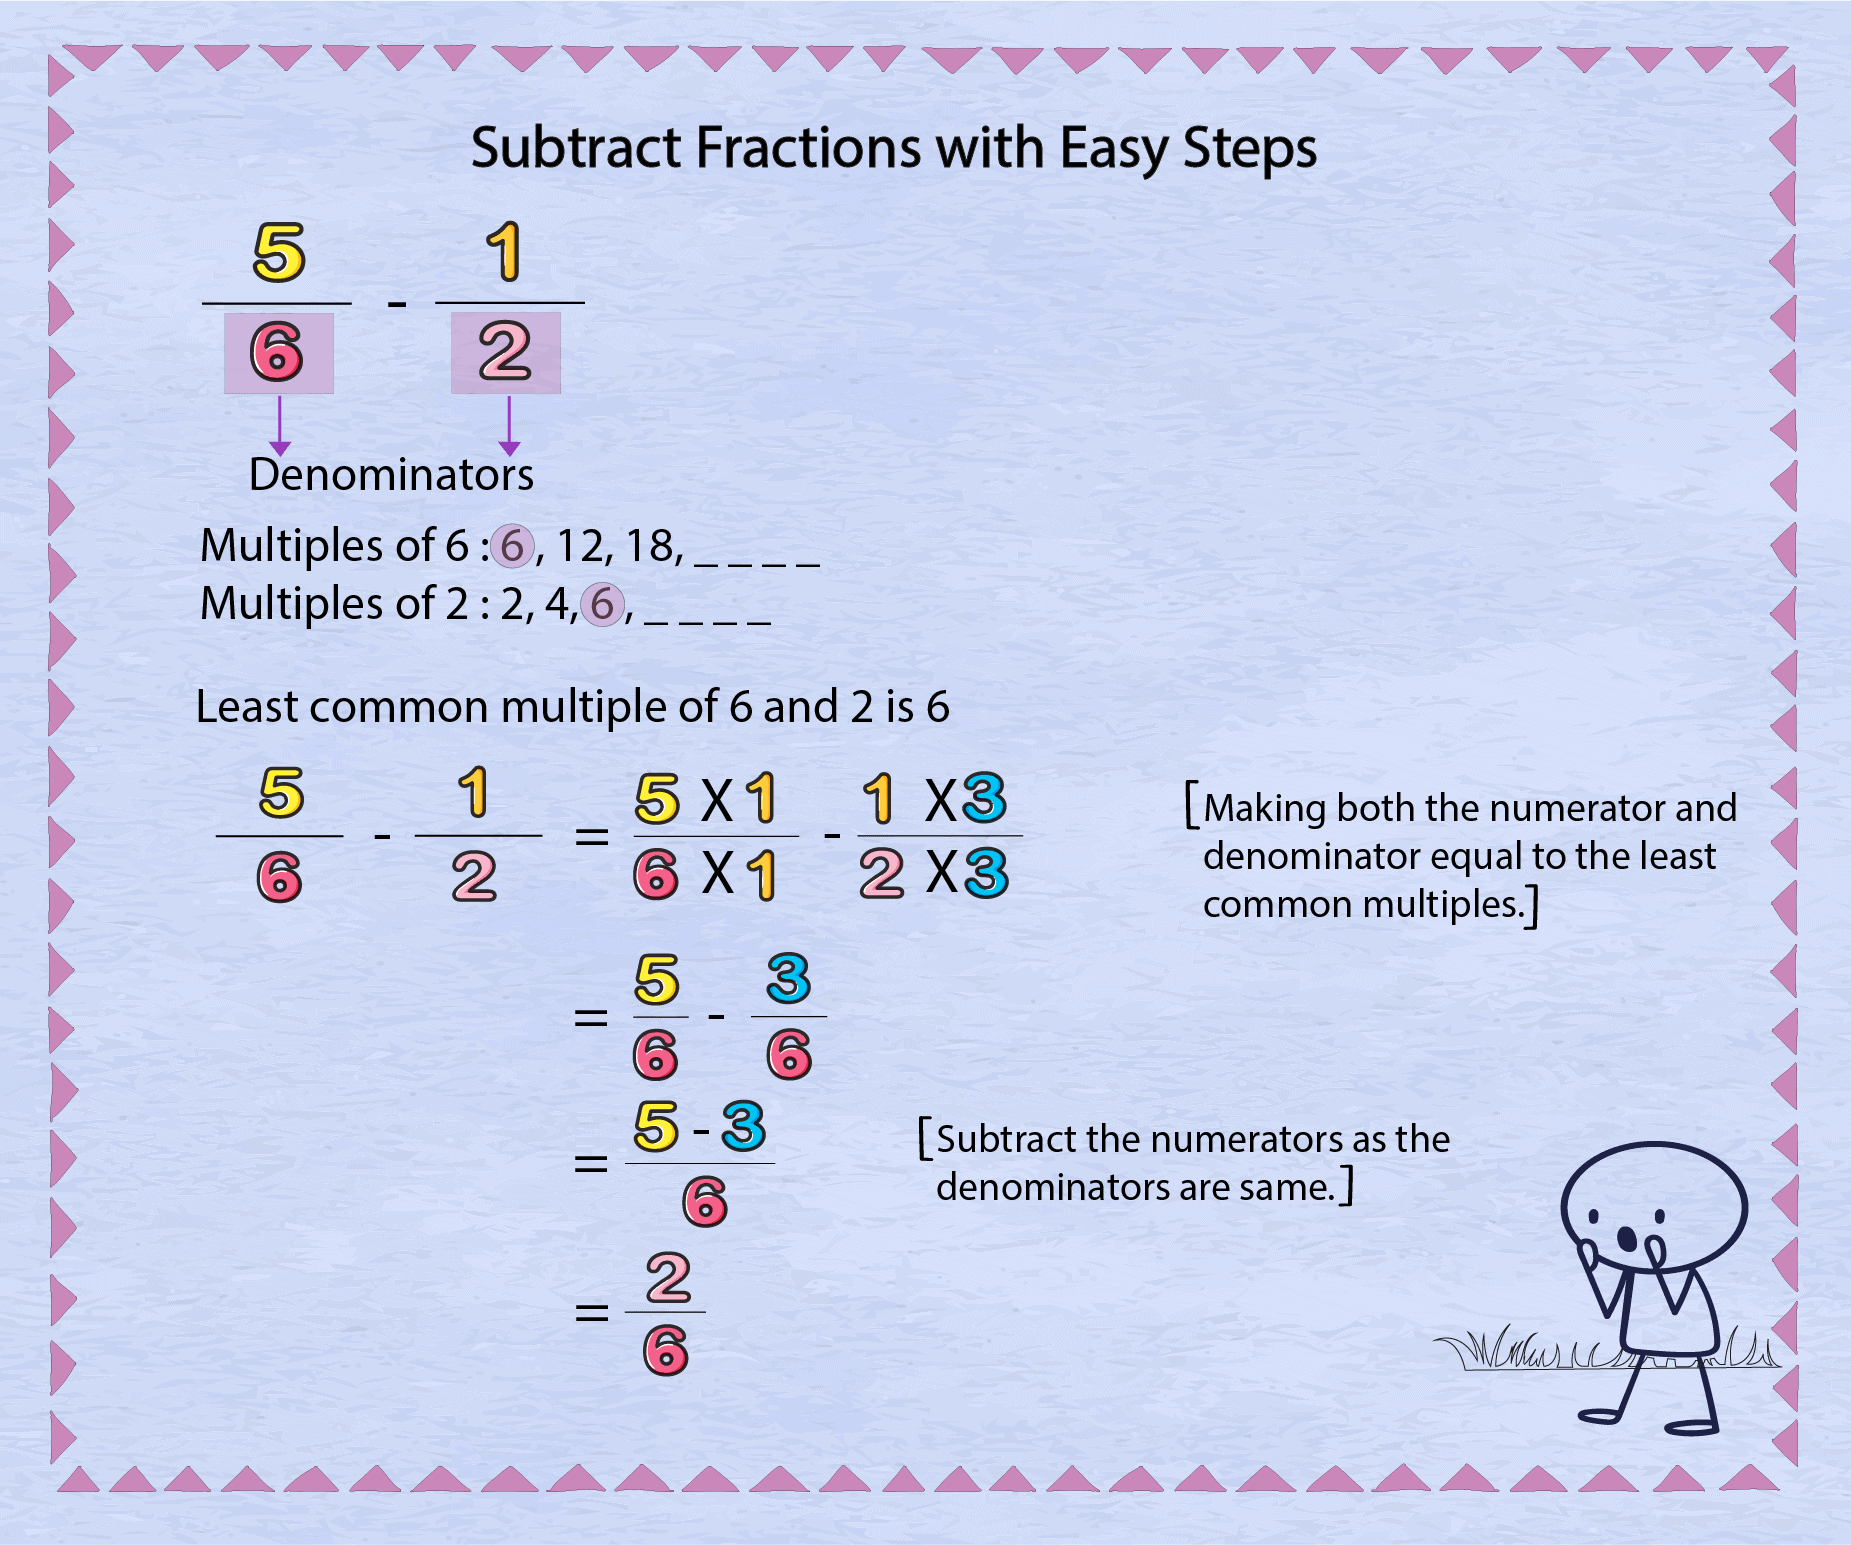 easy steps of Subtracting Fractions